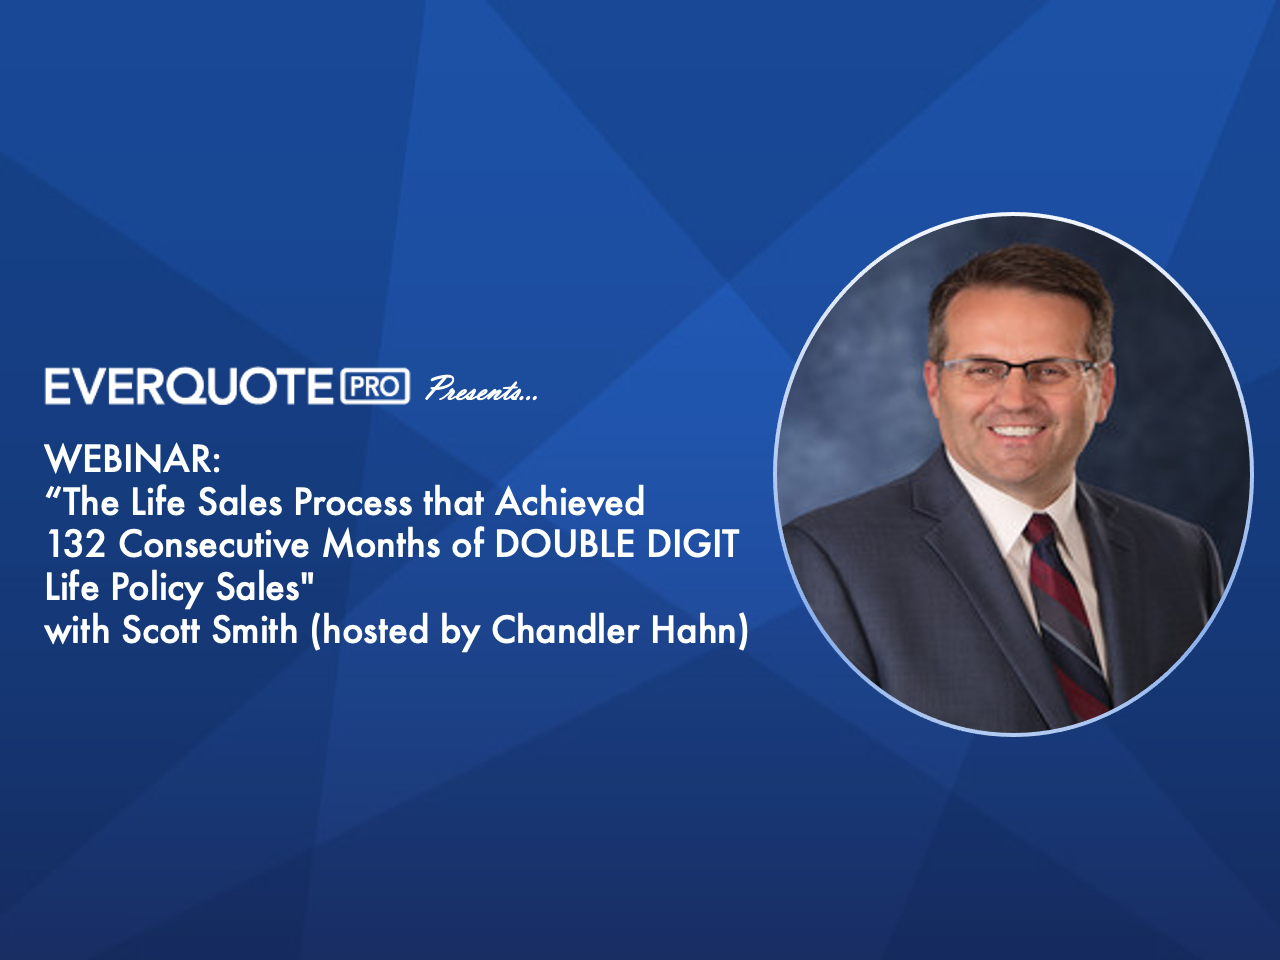 The Life Sales Process that Achieved 132 Consecutive Months of DOUBLE DIGIT Life Policy with Scott Smith